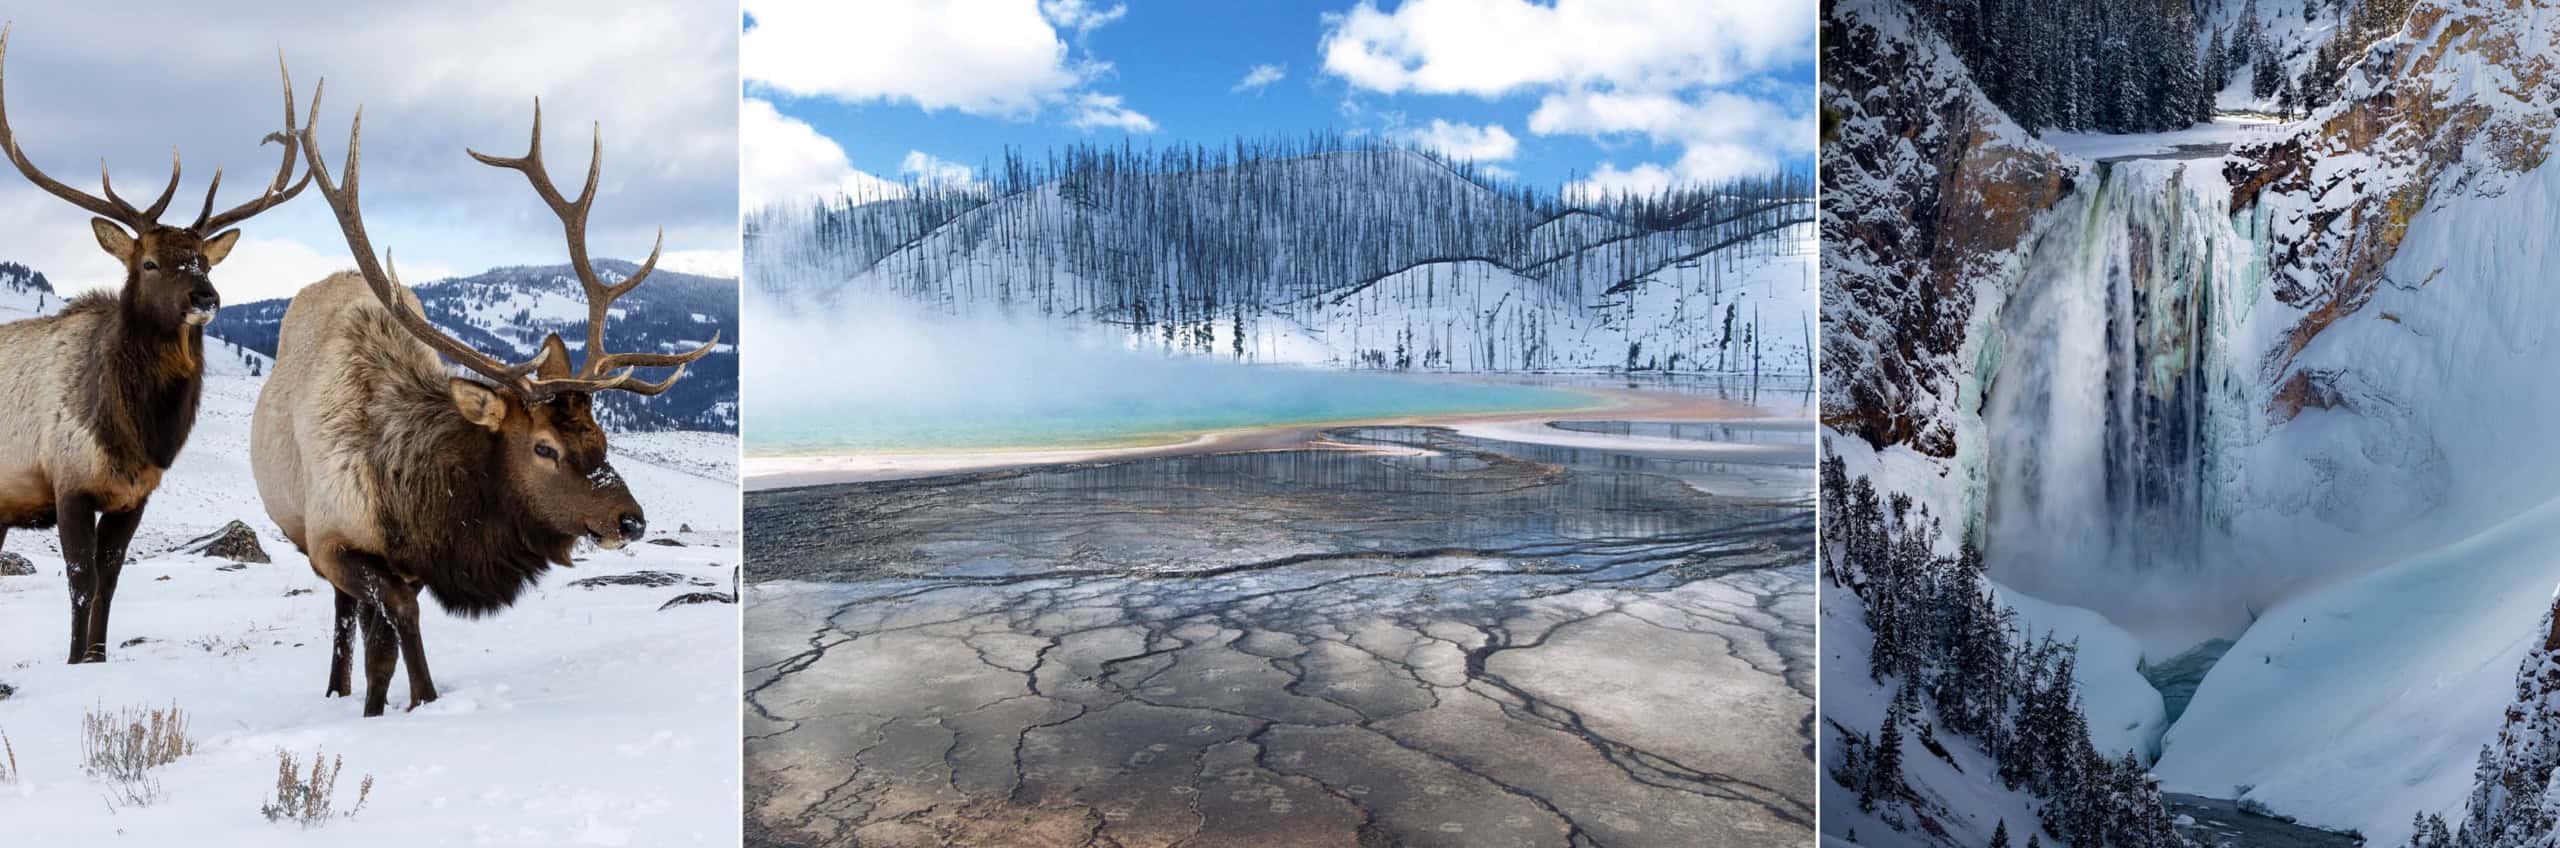 Views of Yellowstone National Park during the winter